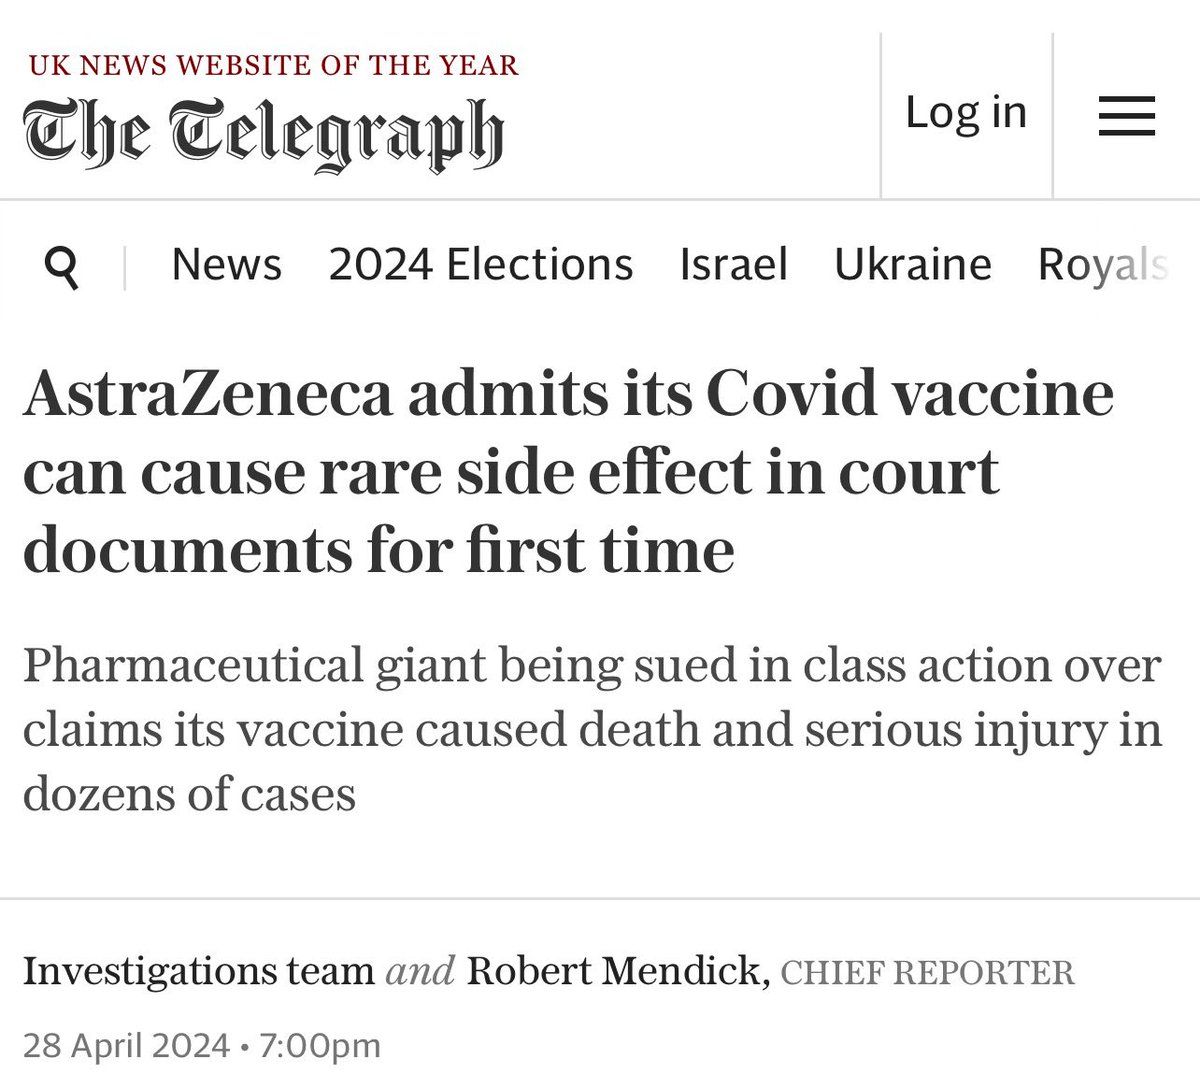 “AstraZeneca has admitted for the first time in court documents that its Covid vaccine can cause a rare side effect, in an apparent about-turn that could pave the way for a multi-million pound legal payout. The pharmaceutical giant is being sued in a class action over claims…